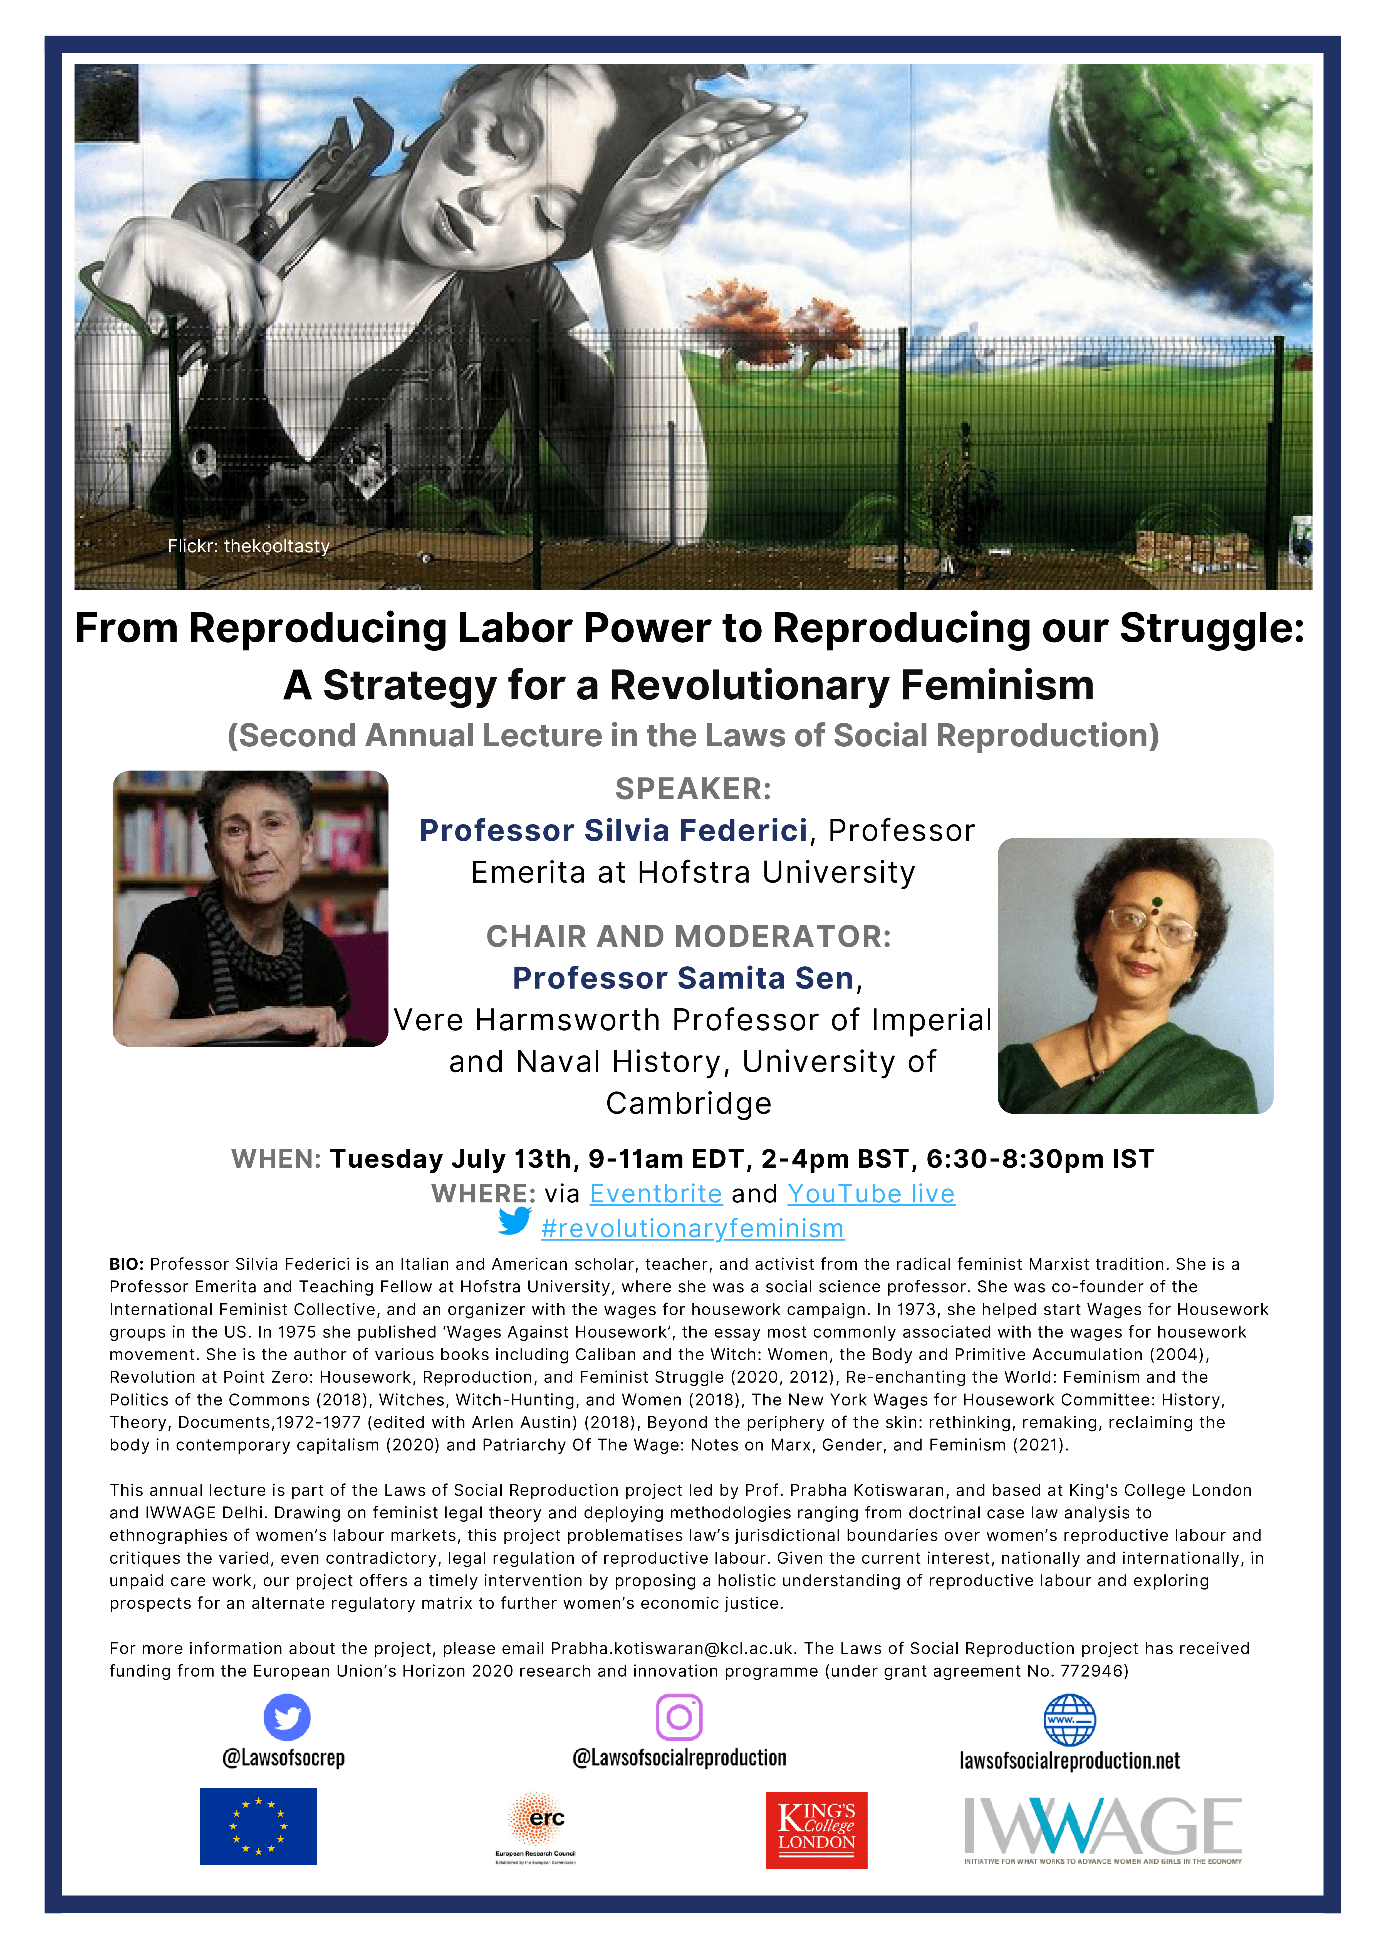 Poster for Silvia Federici's Lecture, giving speaker and chair details, date and time, abstract and sponsor logos.